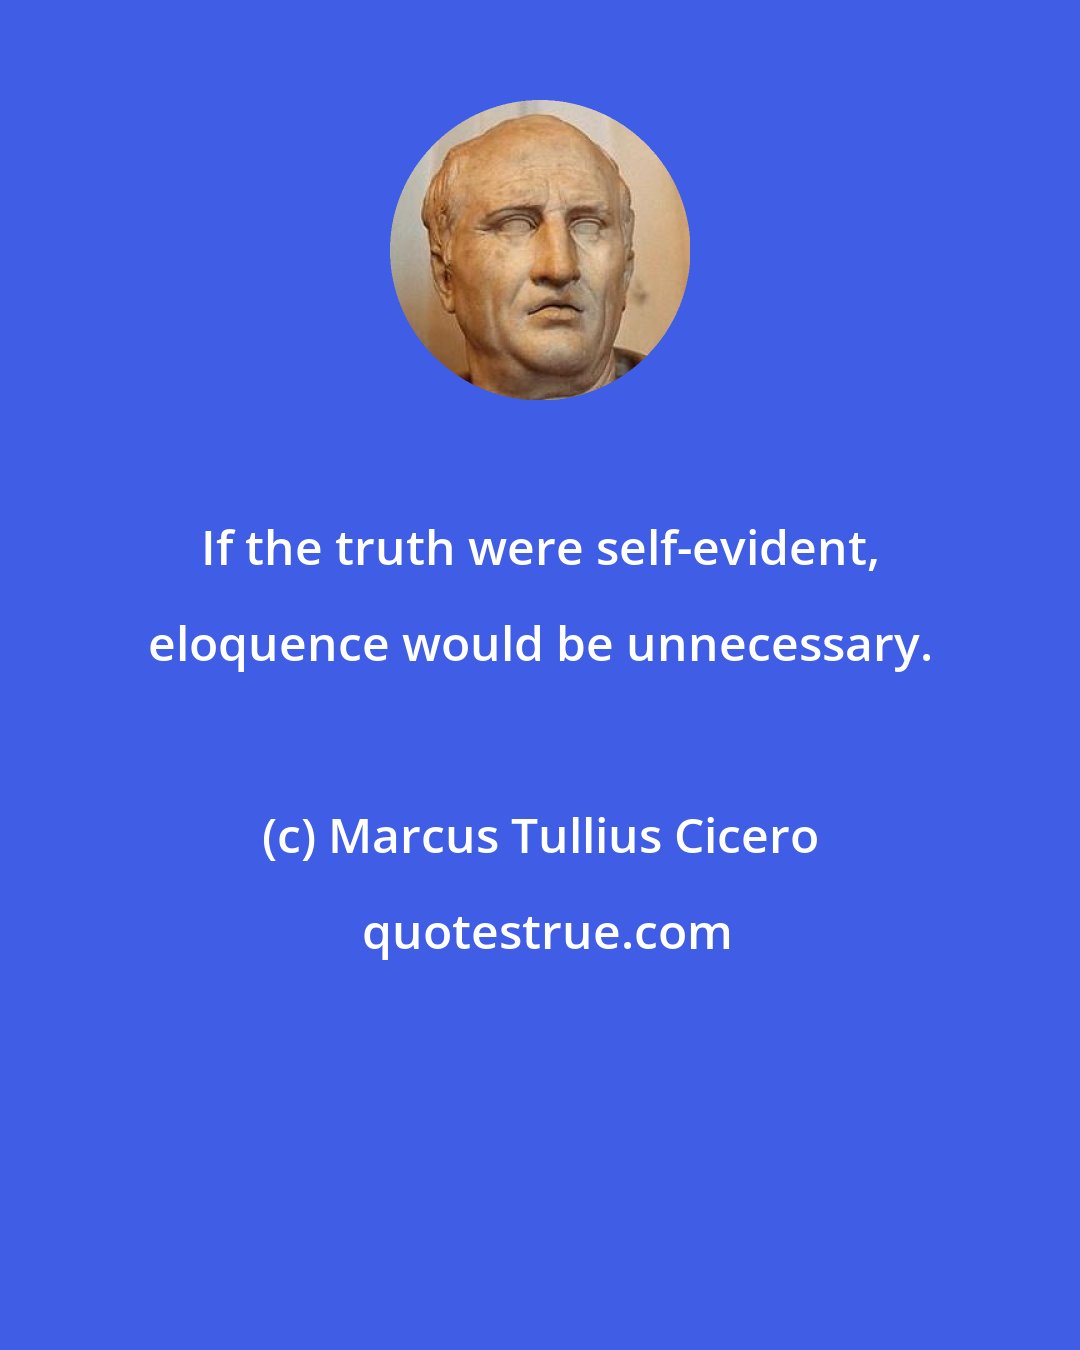 Marcus Tullius Cicero: If the truth were self-evident, eloquence would be unnecessary.